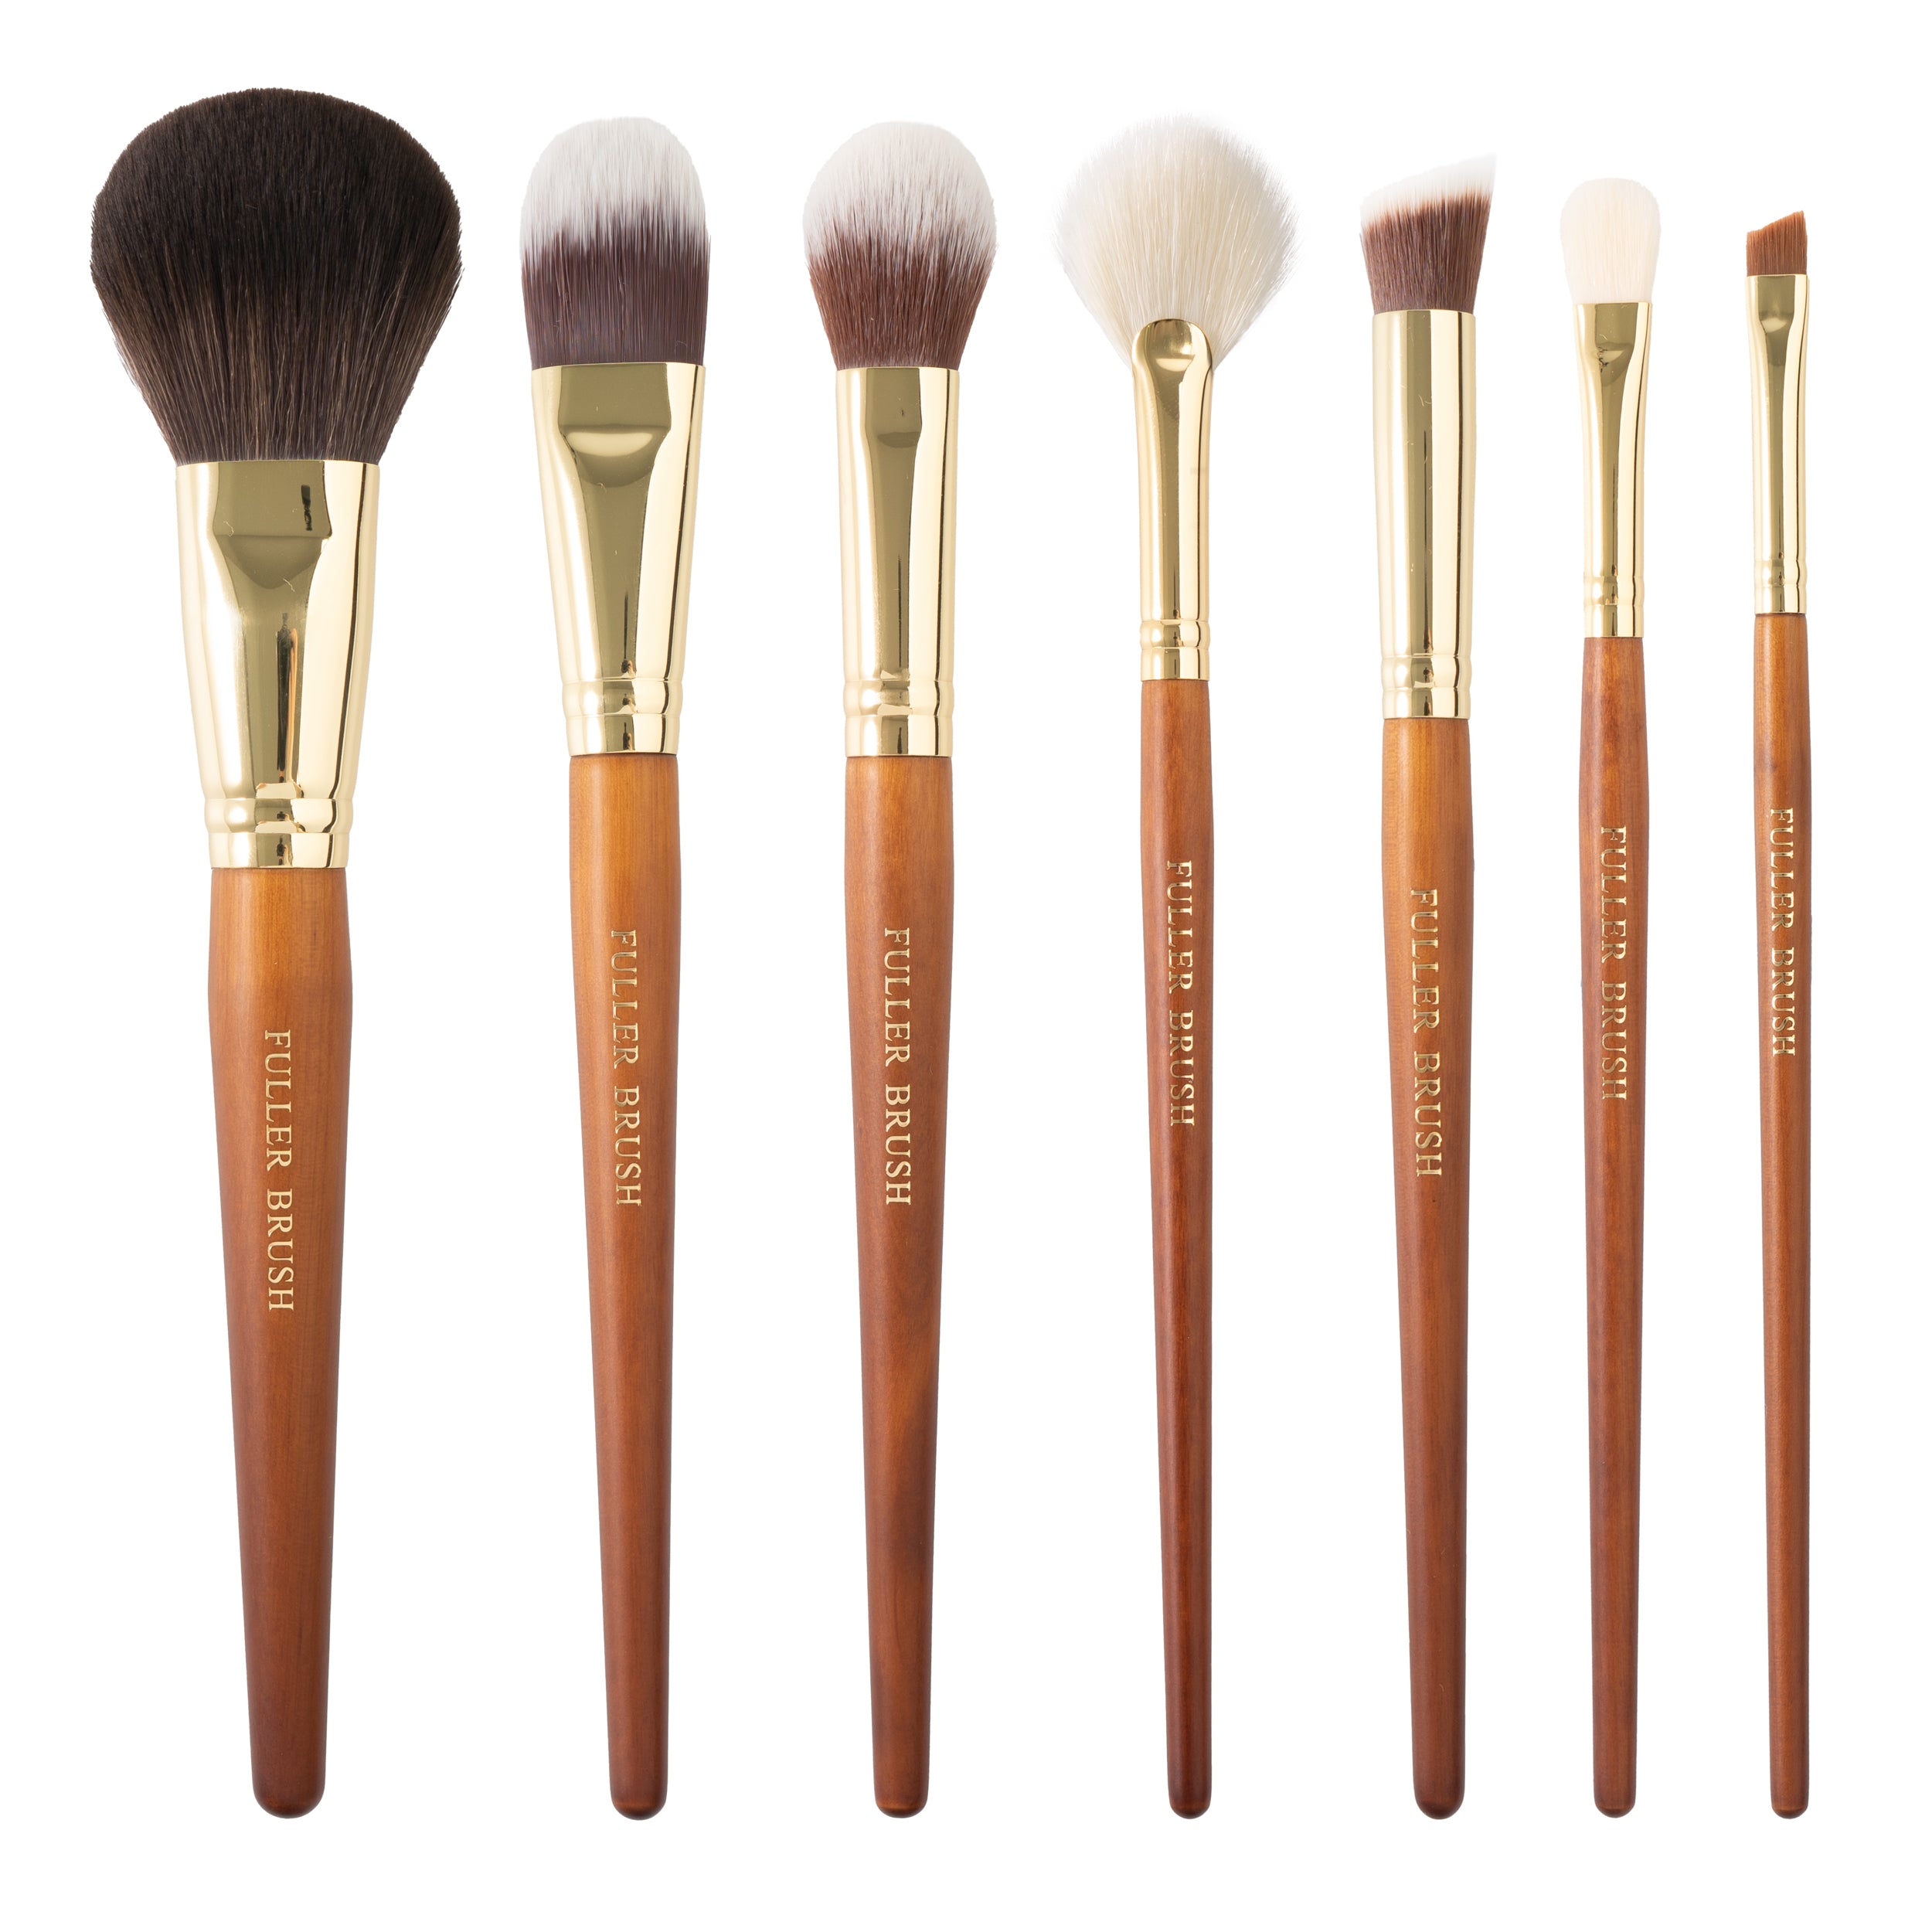 Mat makes fast work of cleaning makeup brushes